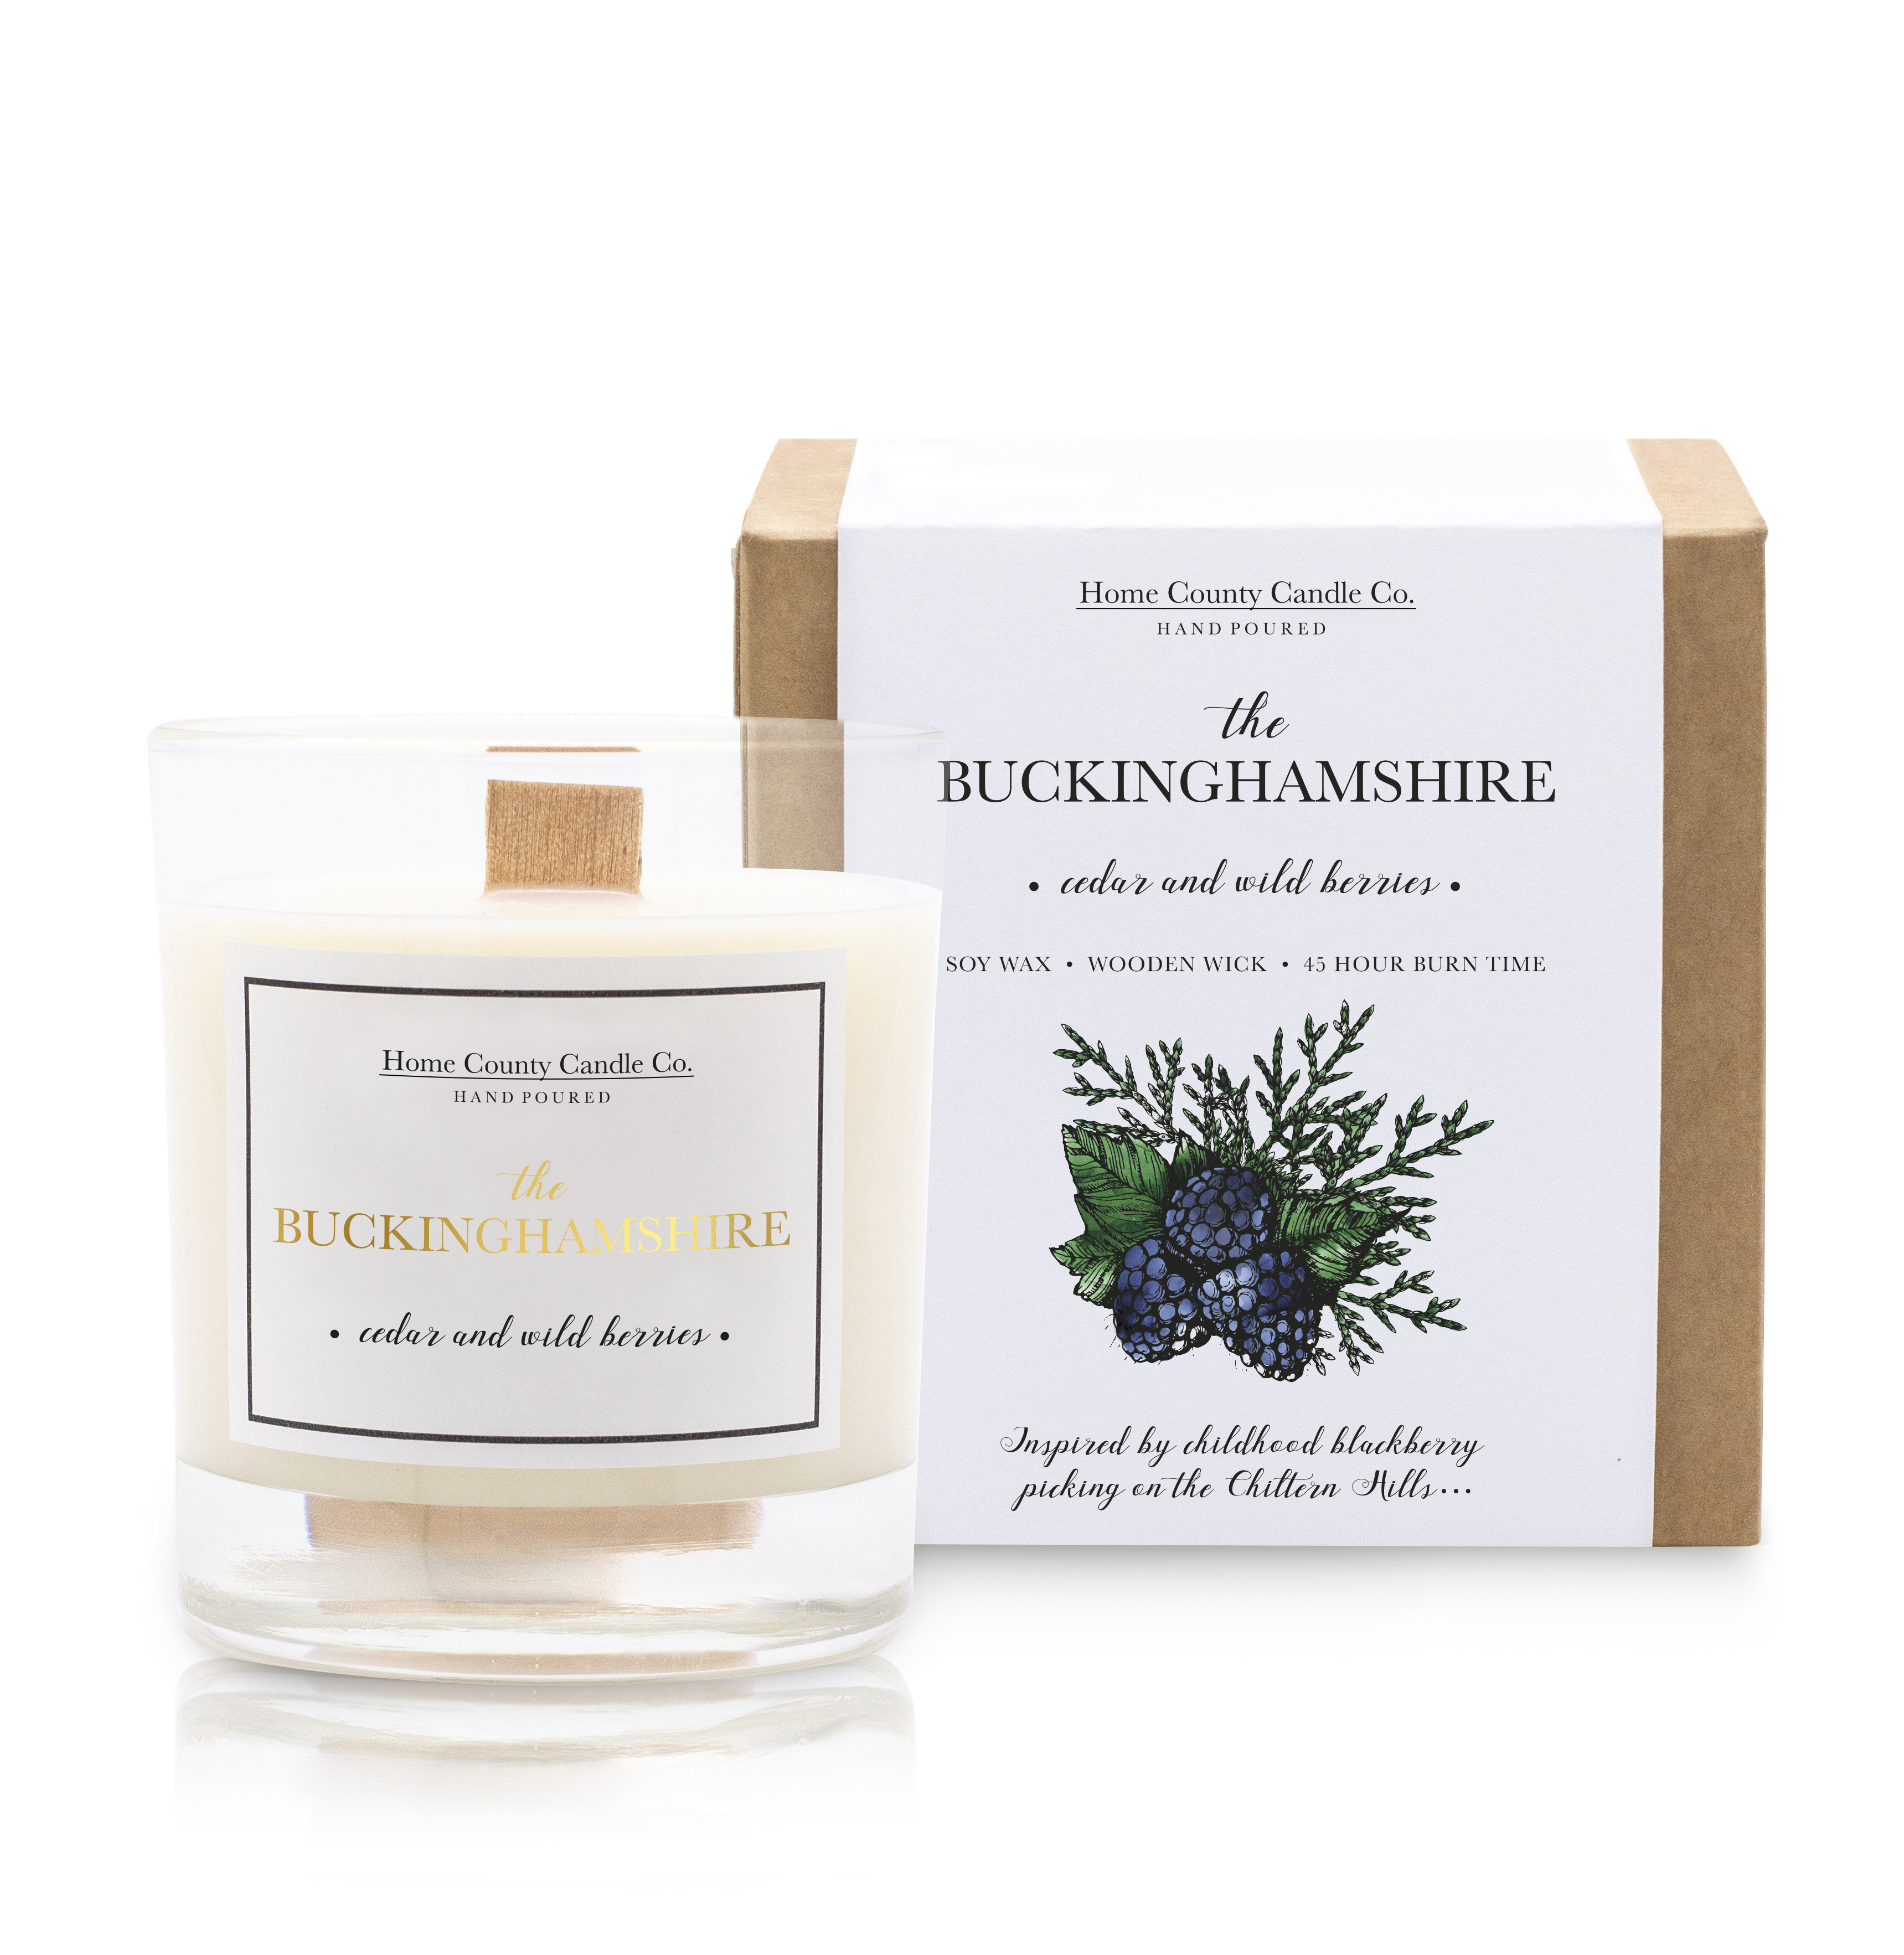 Home County Candle The Buckinghamshire Cedar and Wild Berries Candle